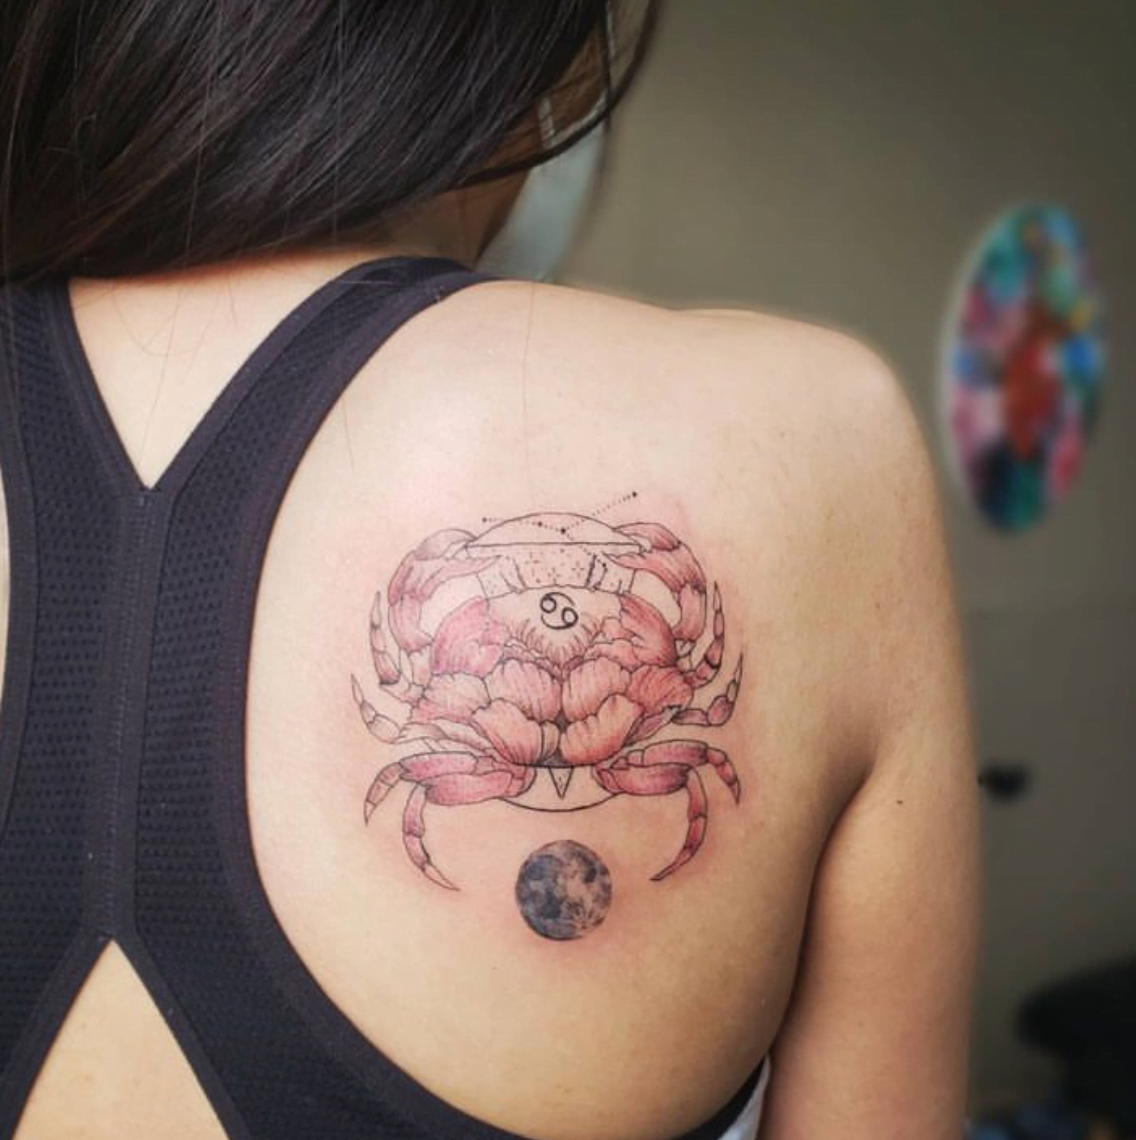 First Tattoo - Cute Crab by Gothicgalx on DeviantArt